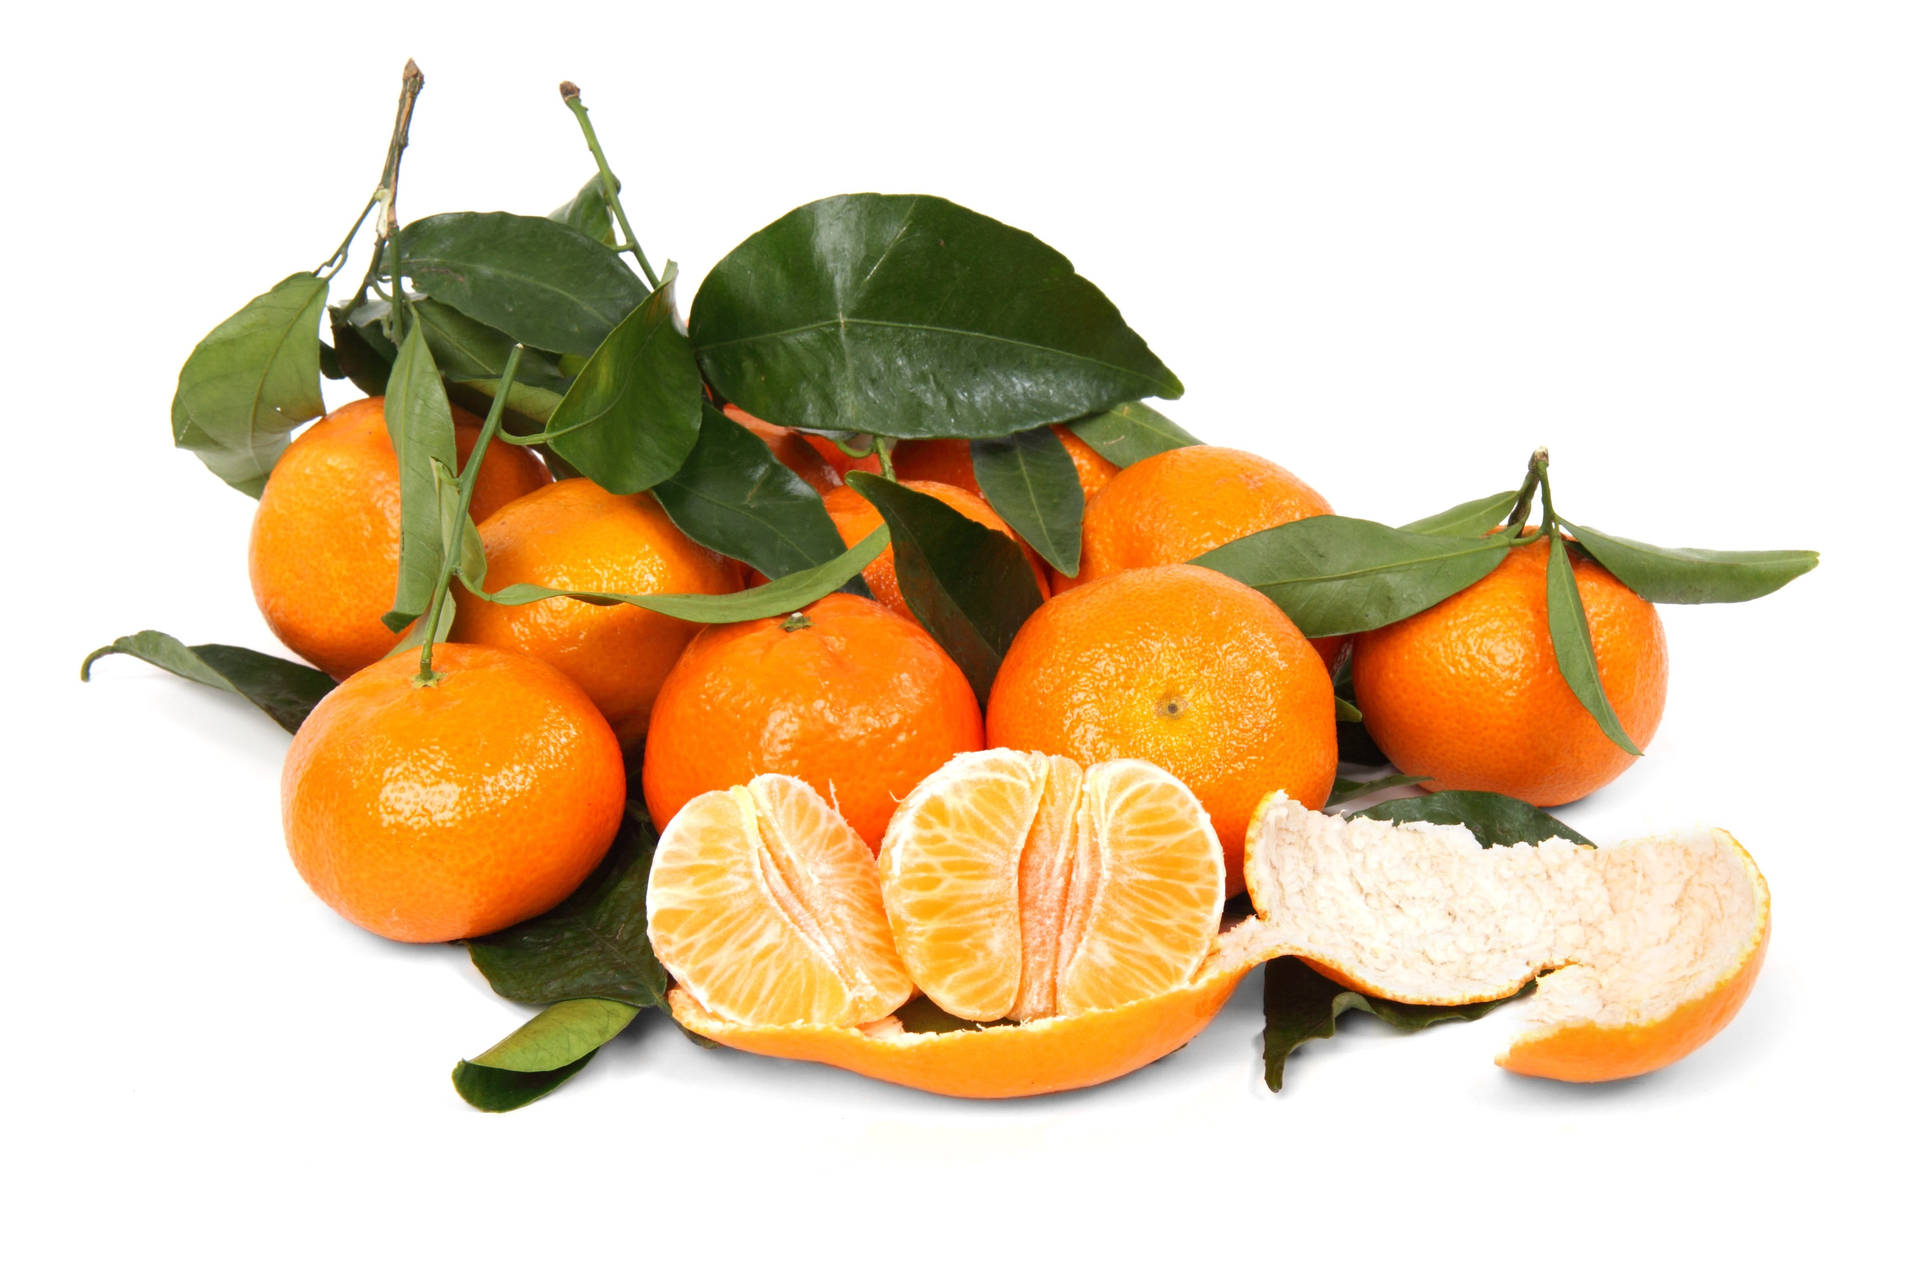 Bright and Fresh Clementine Citrus Fruits with Segments Wallpaper